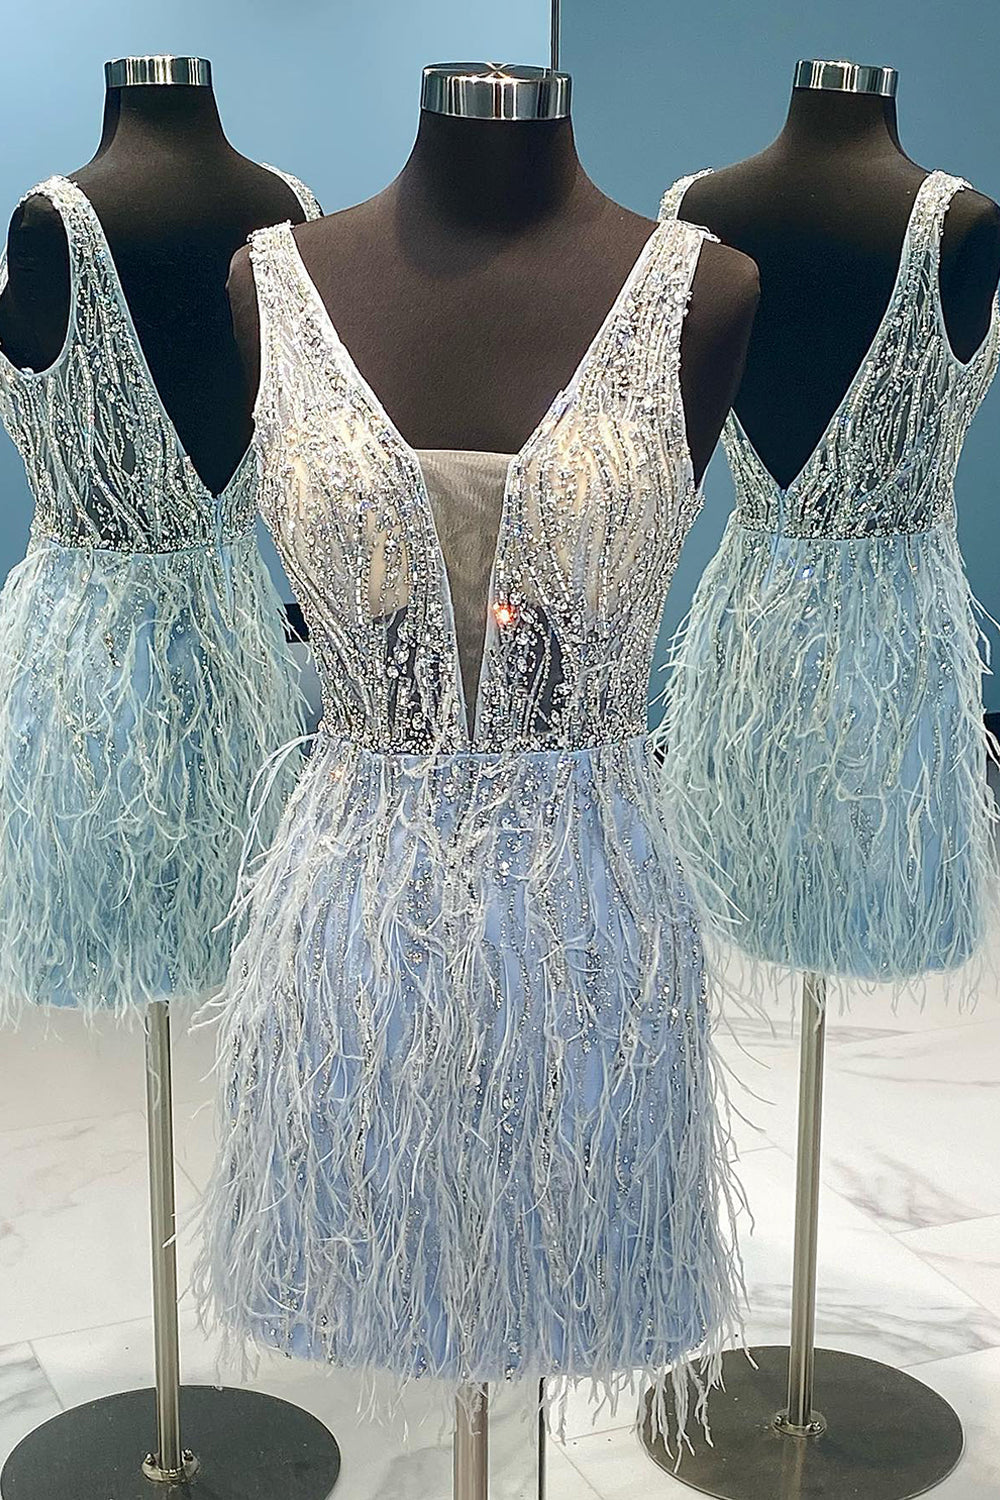 Light Blue Beaded Sequins Tight Corset Homecoming Dress with Feathers outfit, Prom Dress Long